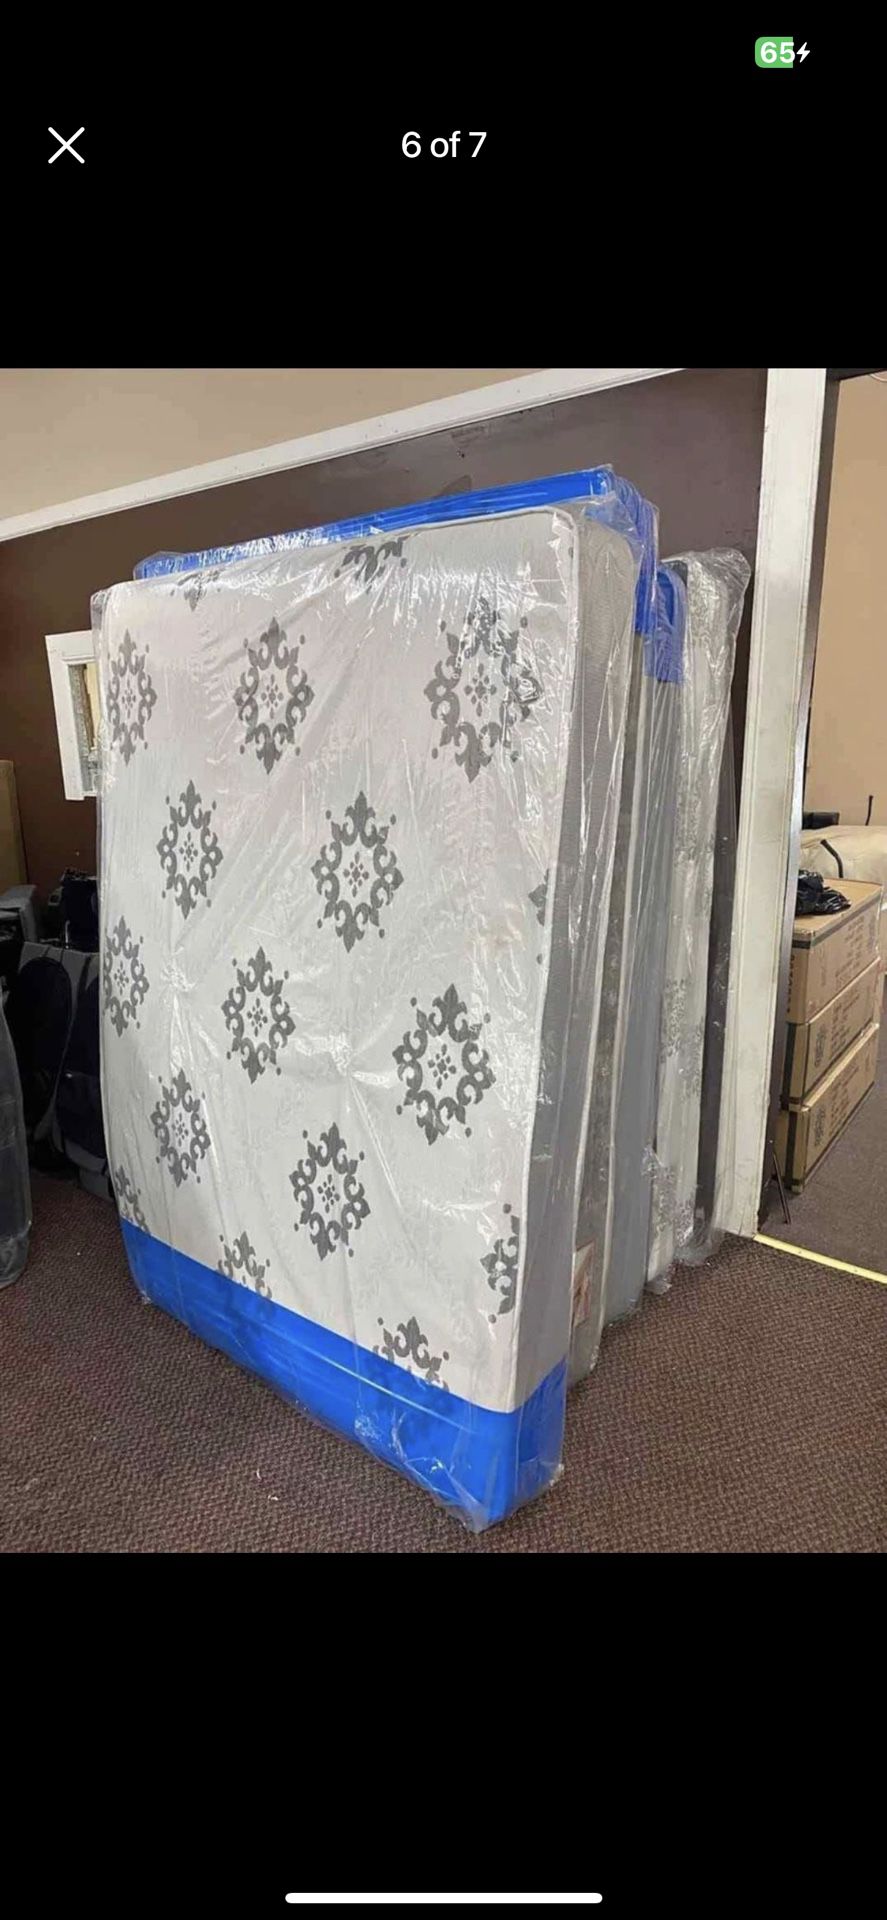 New queen Mattress & Box spring Available On All Sizes! We Deliver!